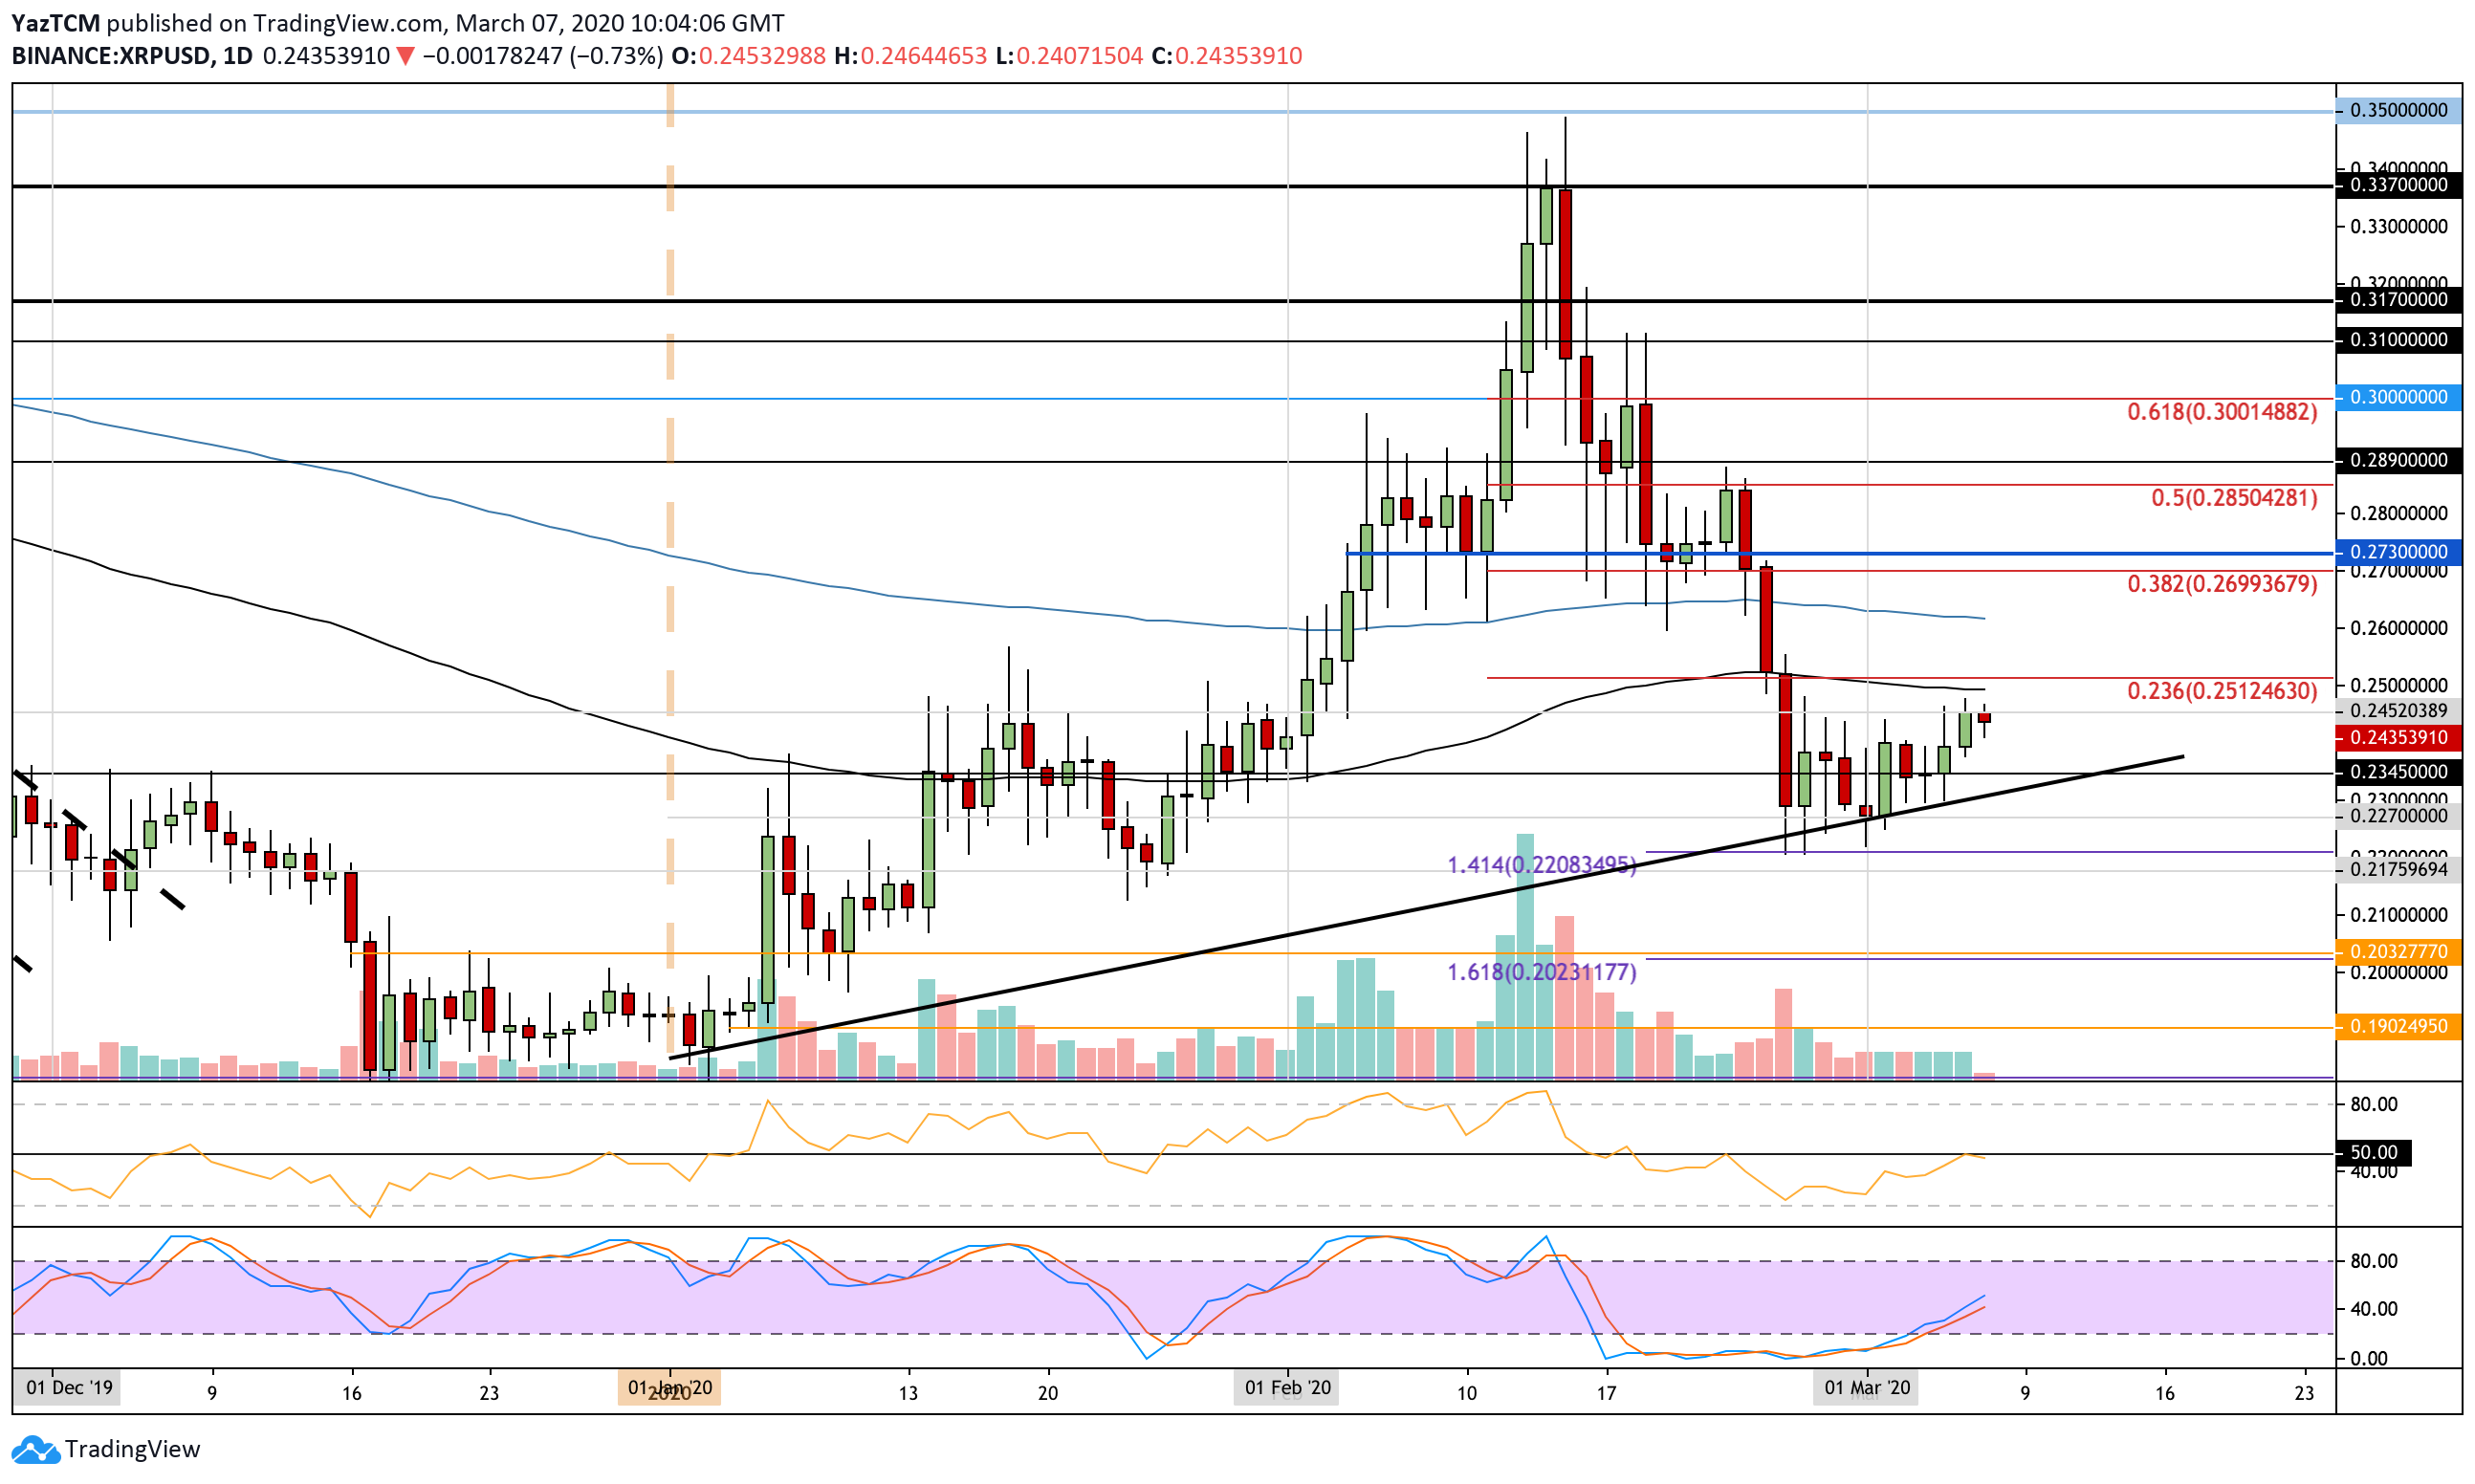 Ripple Price Analysis: Will The Sideways Action End In a Violent XRP Weekend Move?